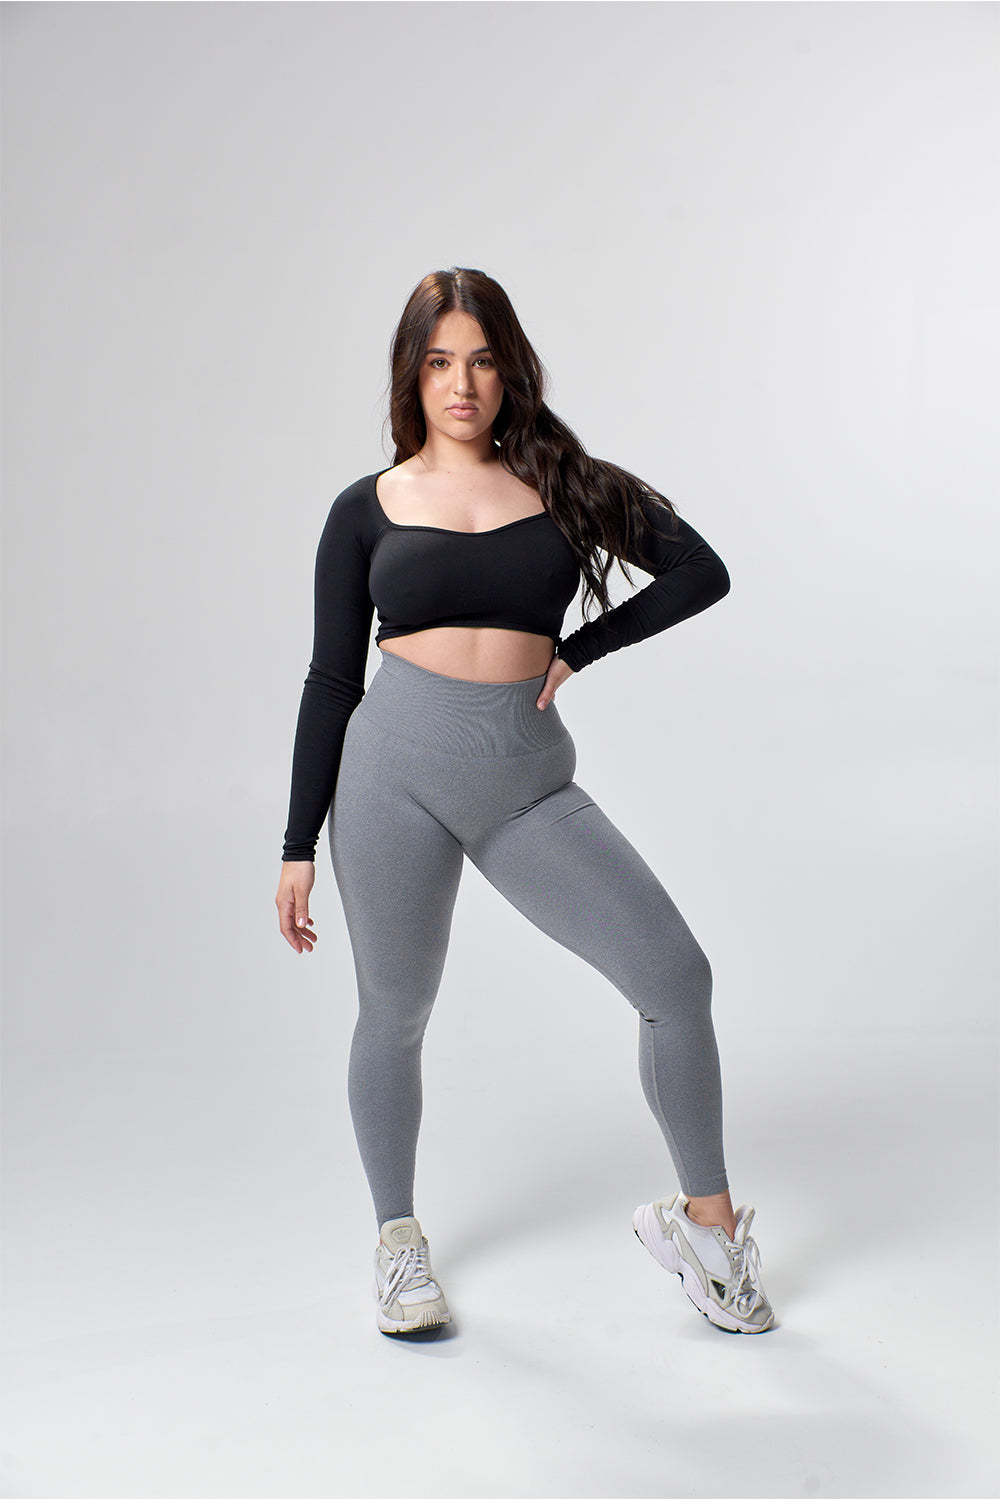 ICON Performance Leggings - Space Grey/Silver